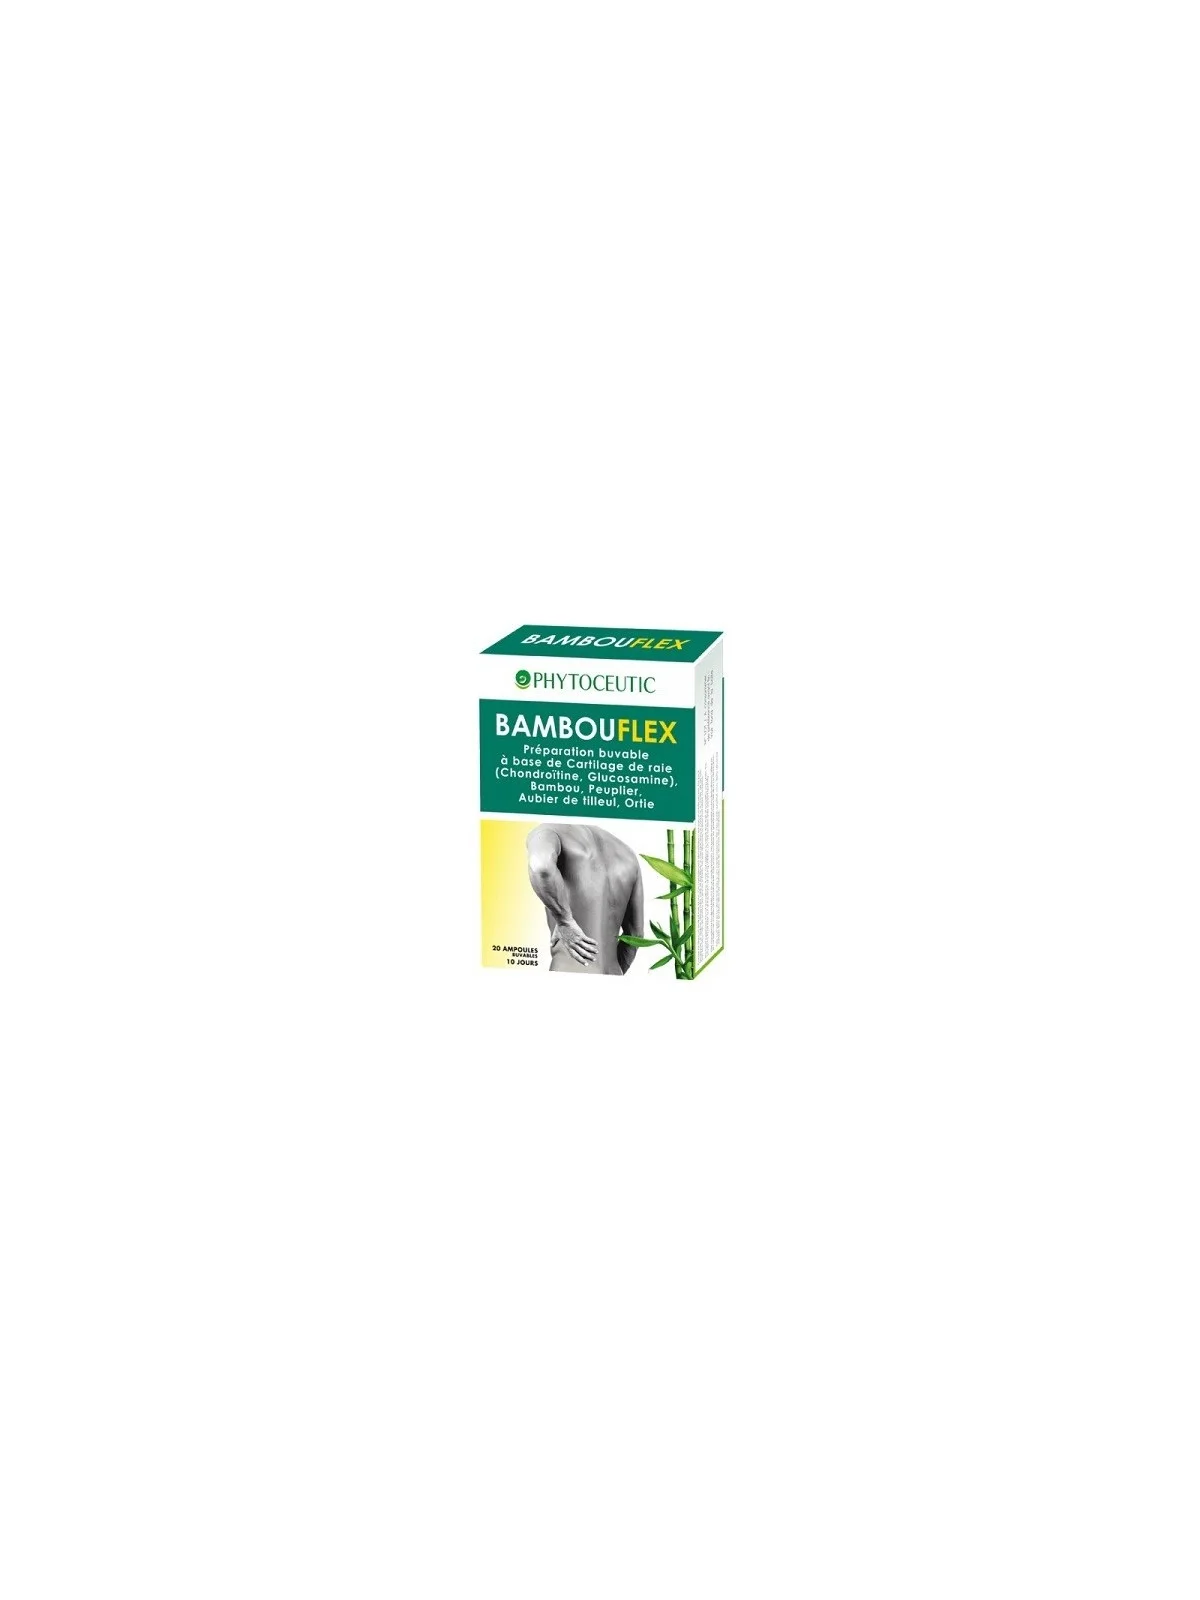 Bambouflex - Confort articulaire Phytoceutic